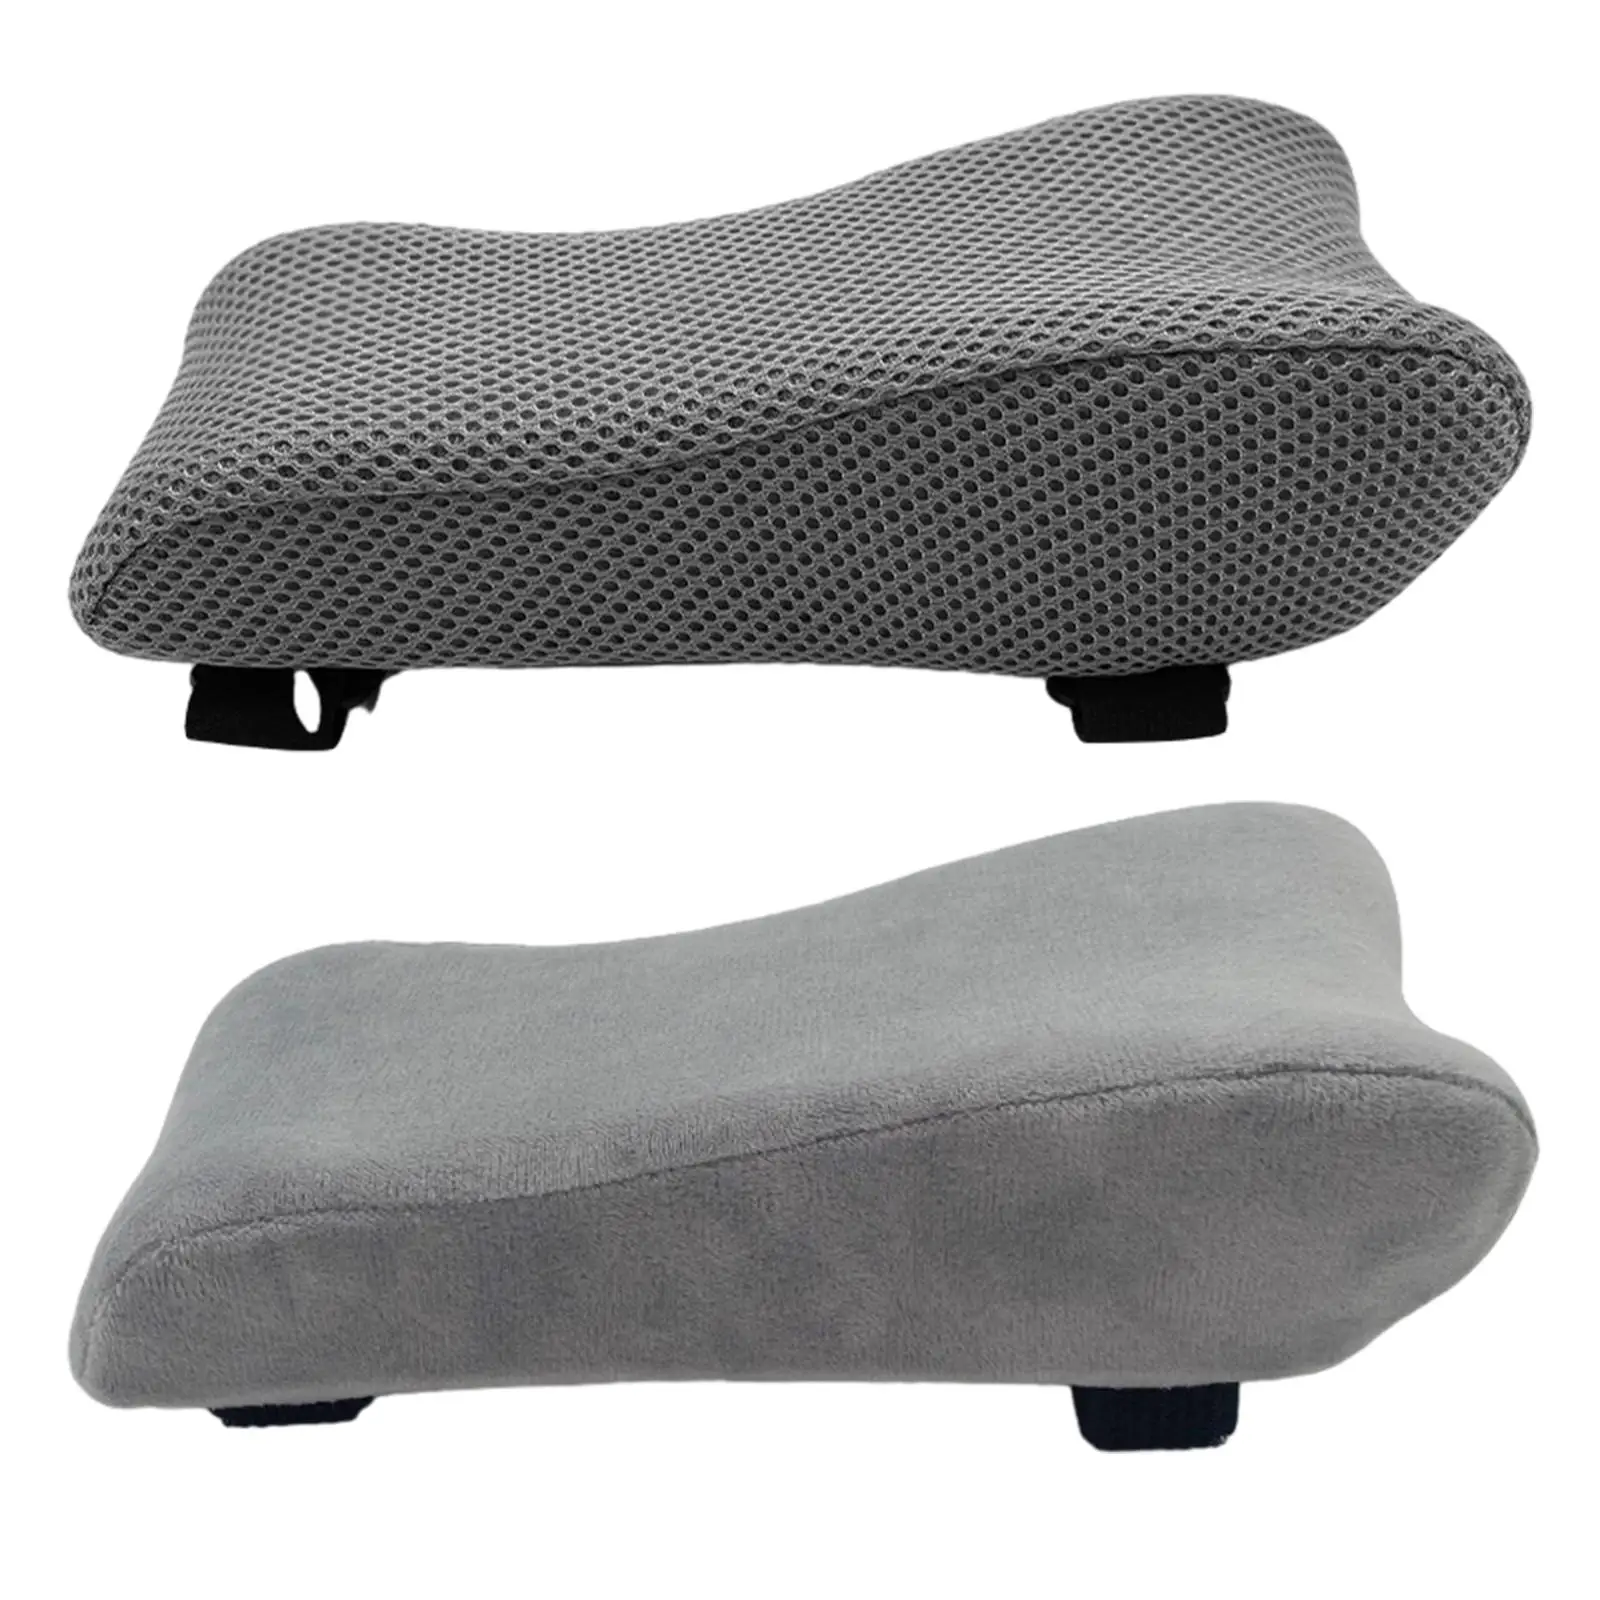 Arm Pads Elbow Pads Office Lightweight Chair Arm Rest Cover Zipper Cover